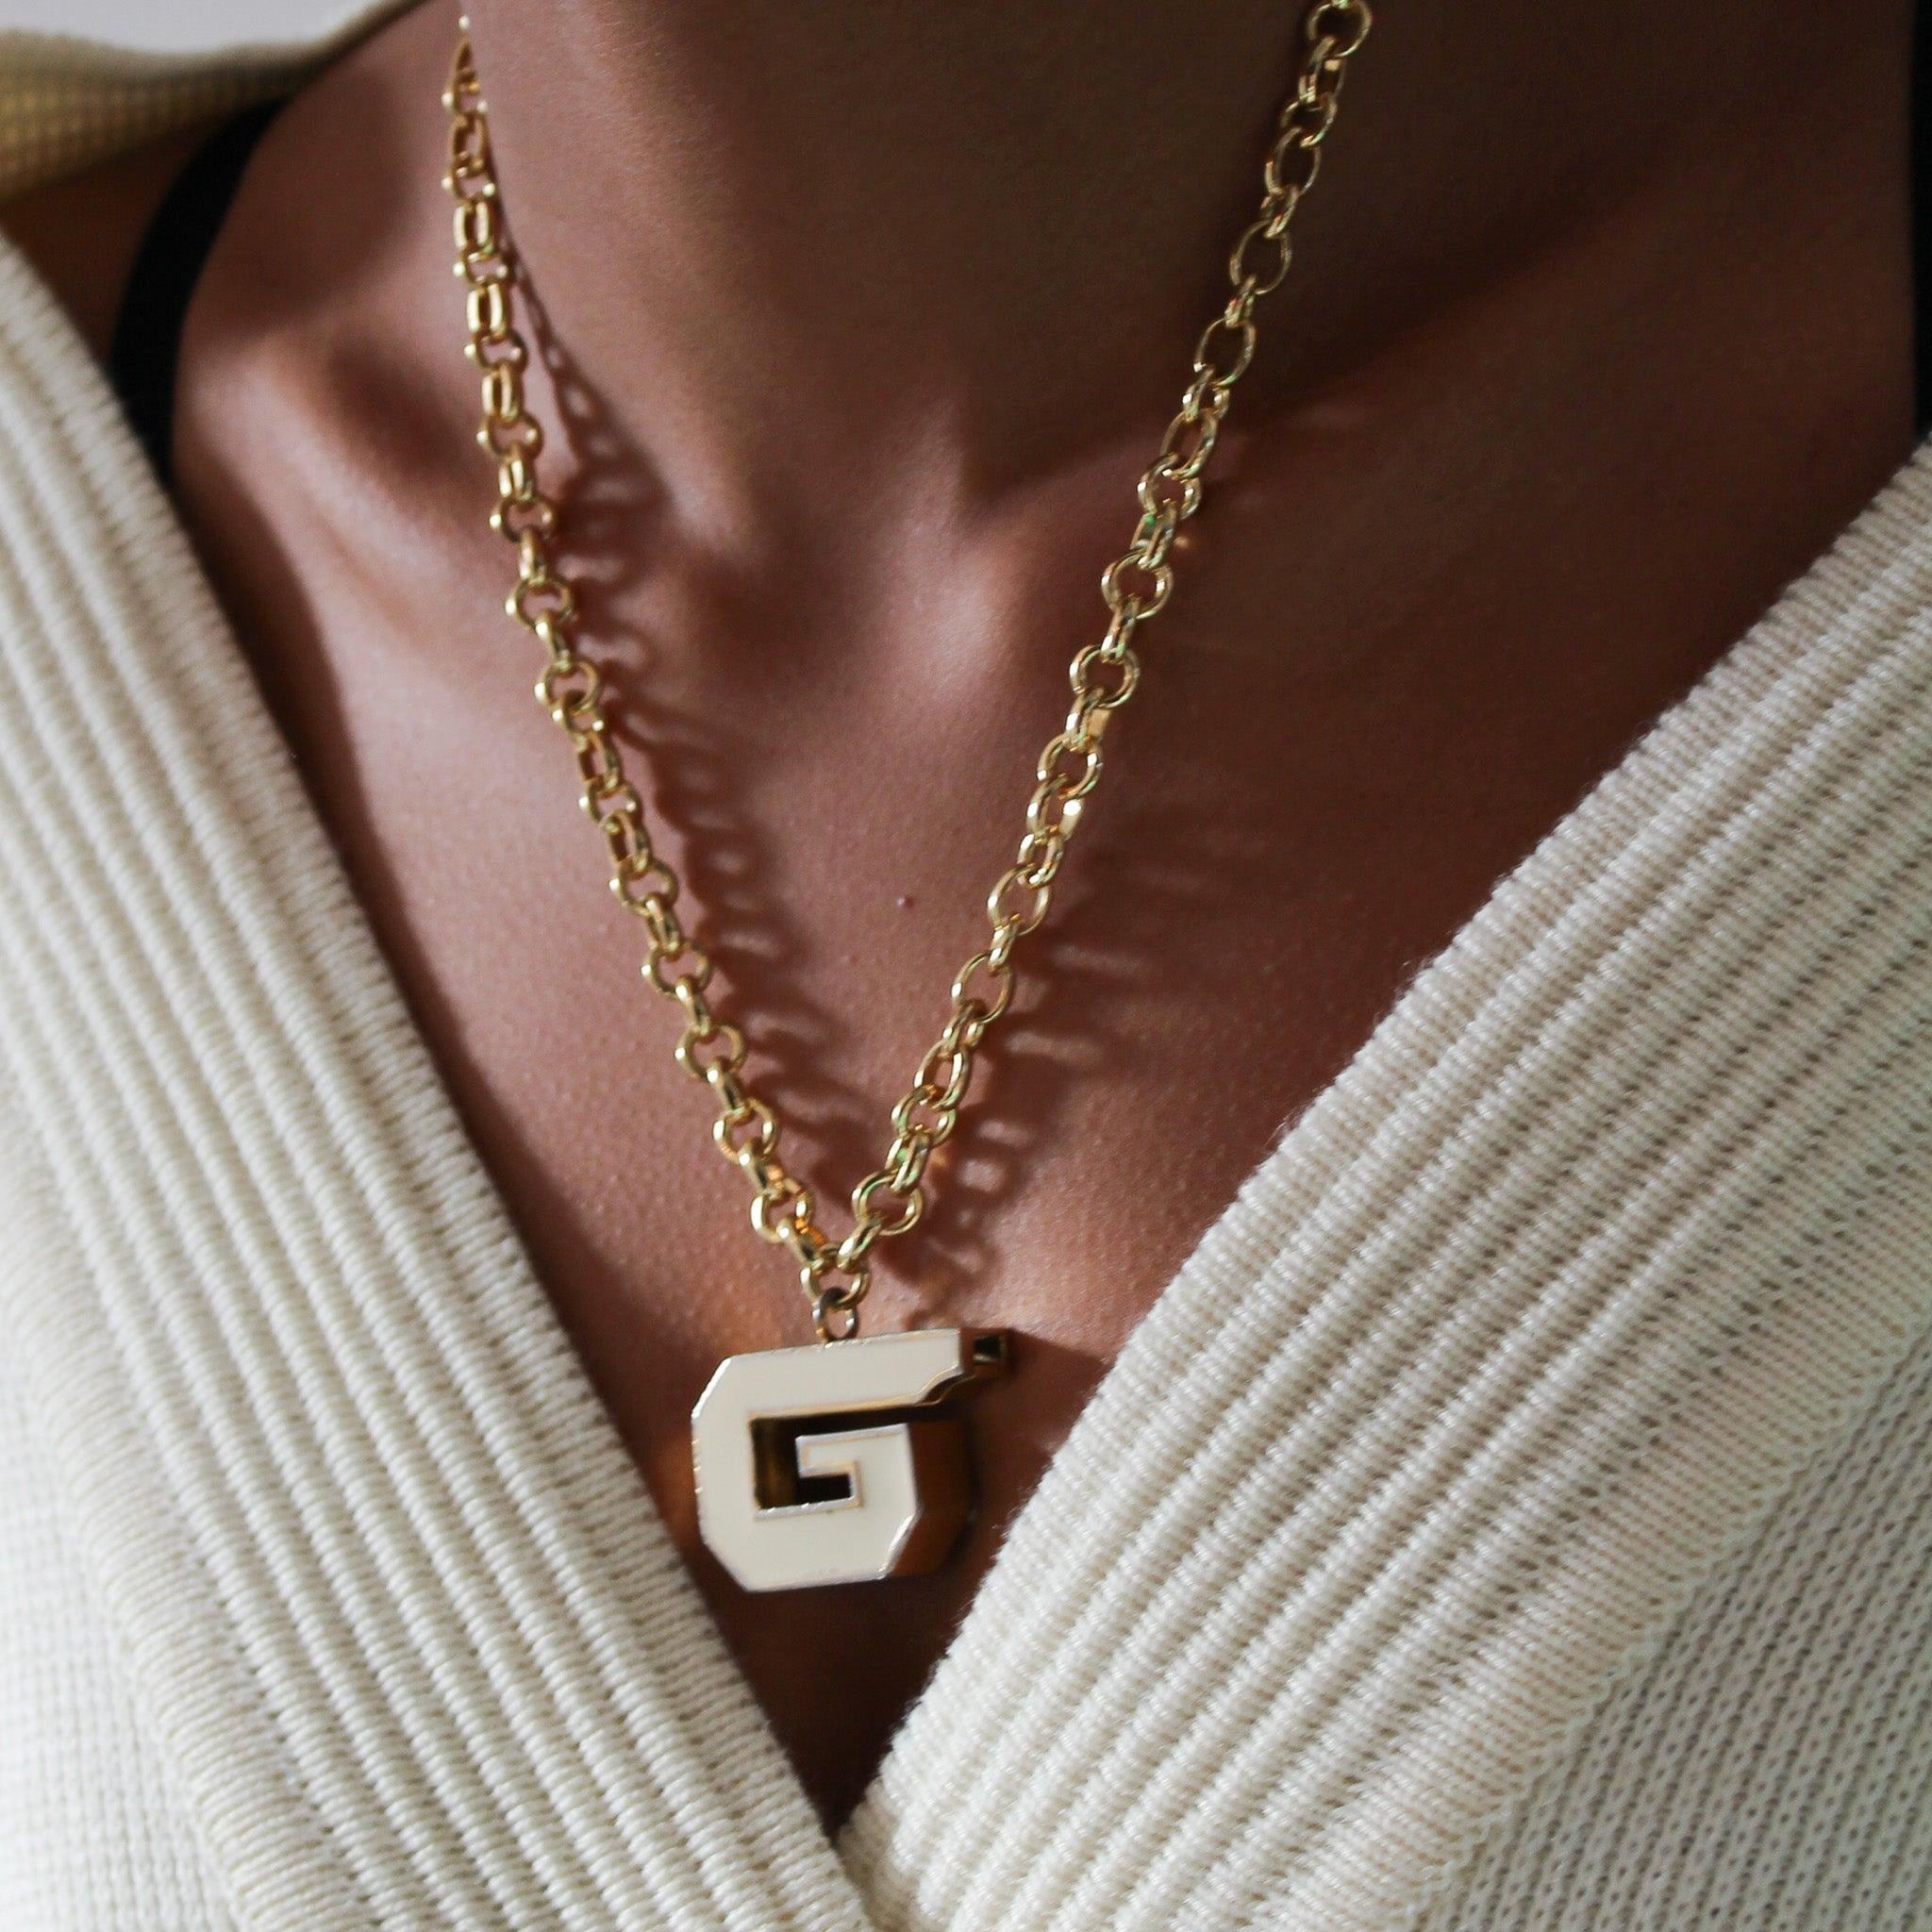 Re-engineered Vintage Givenchy Whistle Keychain Necklace 1970s

One for you old ravers, this Givenchy 'G' 1970s whistle pendant is a new addition to our re-engineered range of vintage jewellery. ⁠
⁠
The 1979 'G' Givenchy whistle is a working whistle